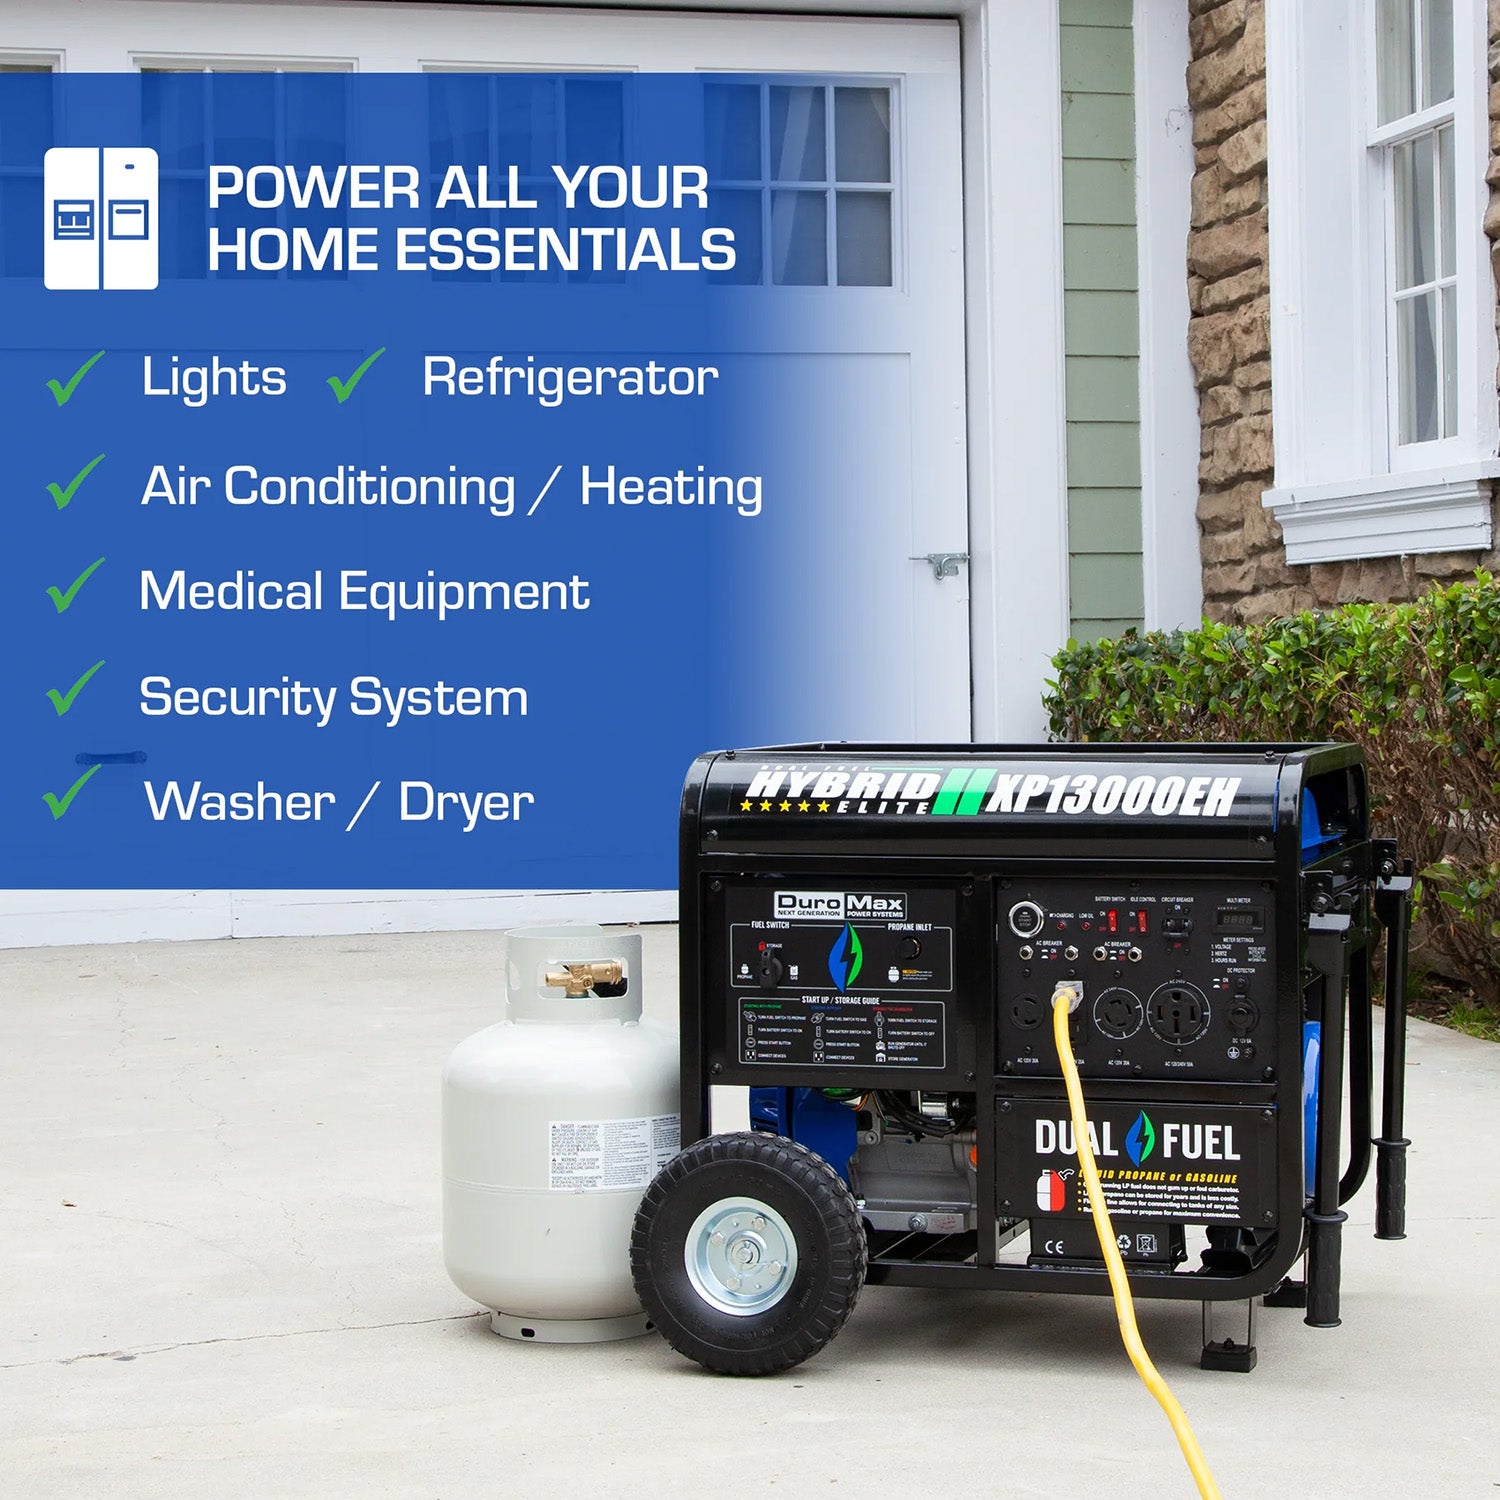 DuroMax XP13000EH Dual Fuel Portable Generator Can Power All of Your Essentials